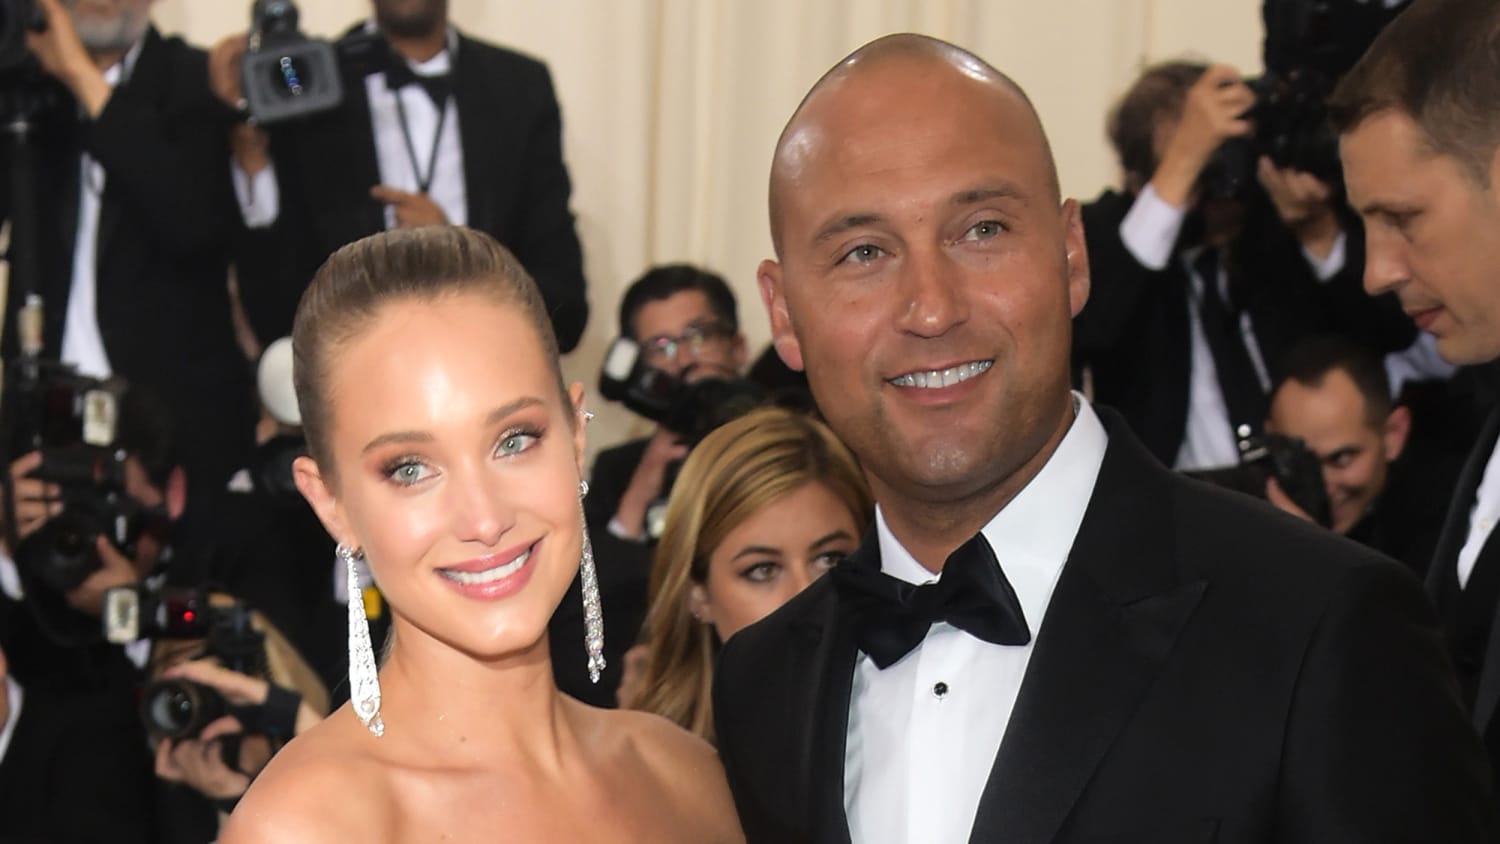 Derek Jeter and wife Hannah are expecting a baby girl - TODAY.com2500 x 1407